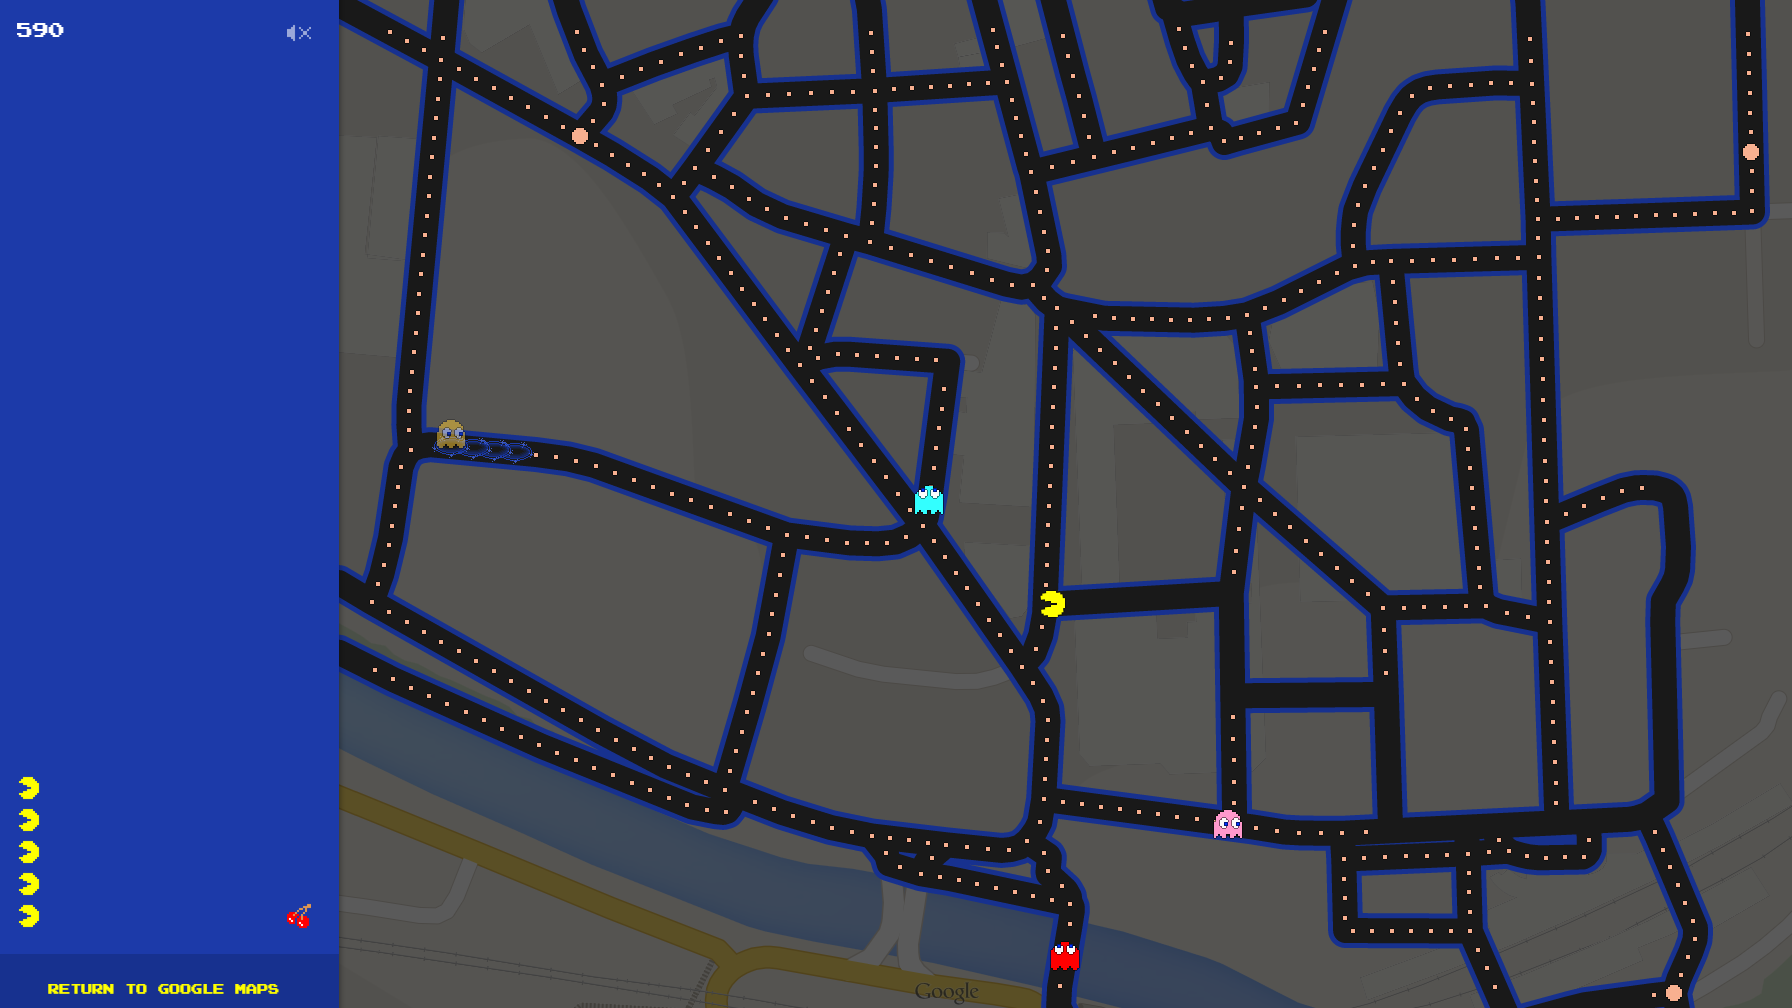 Google Maps transforms streets into giant Pac-Man game